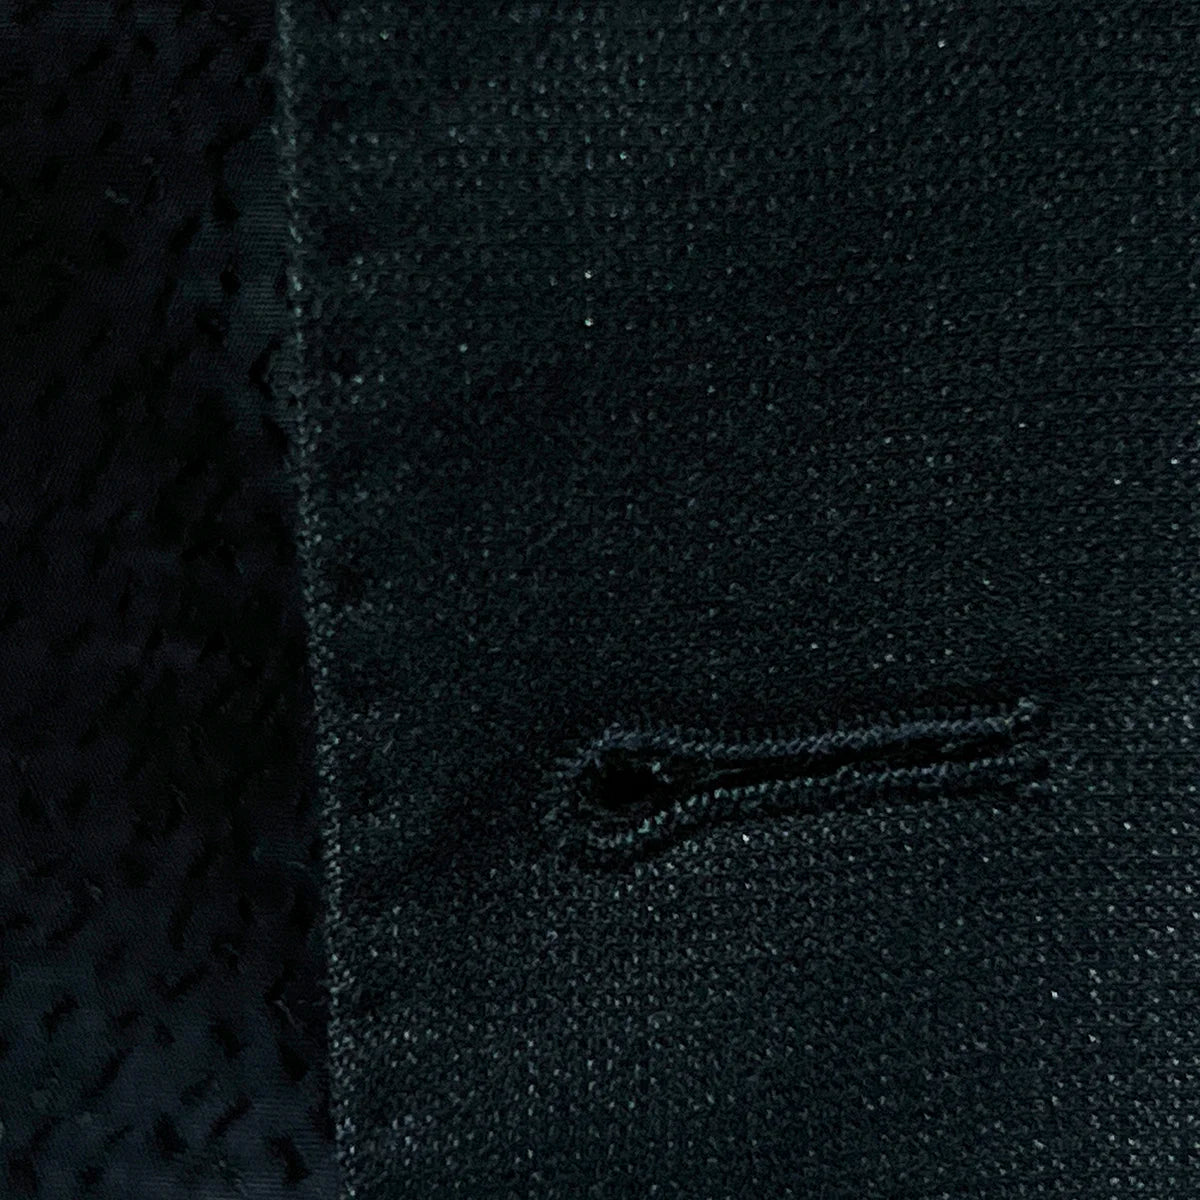 Intricate stitching detail on the buttonholes of the westwood hart men's shiny black glitter tuxedo, elevating this black tie formalwear piece.